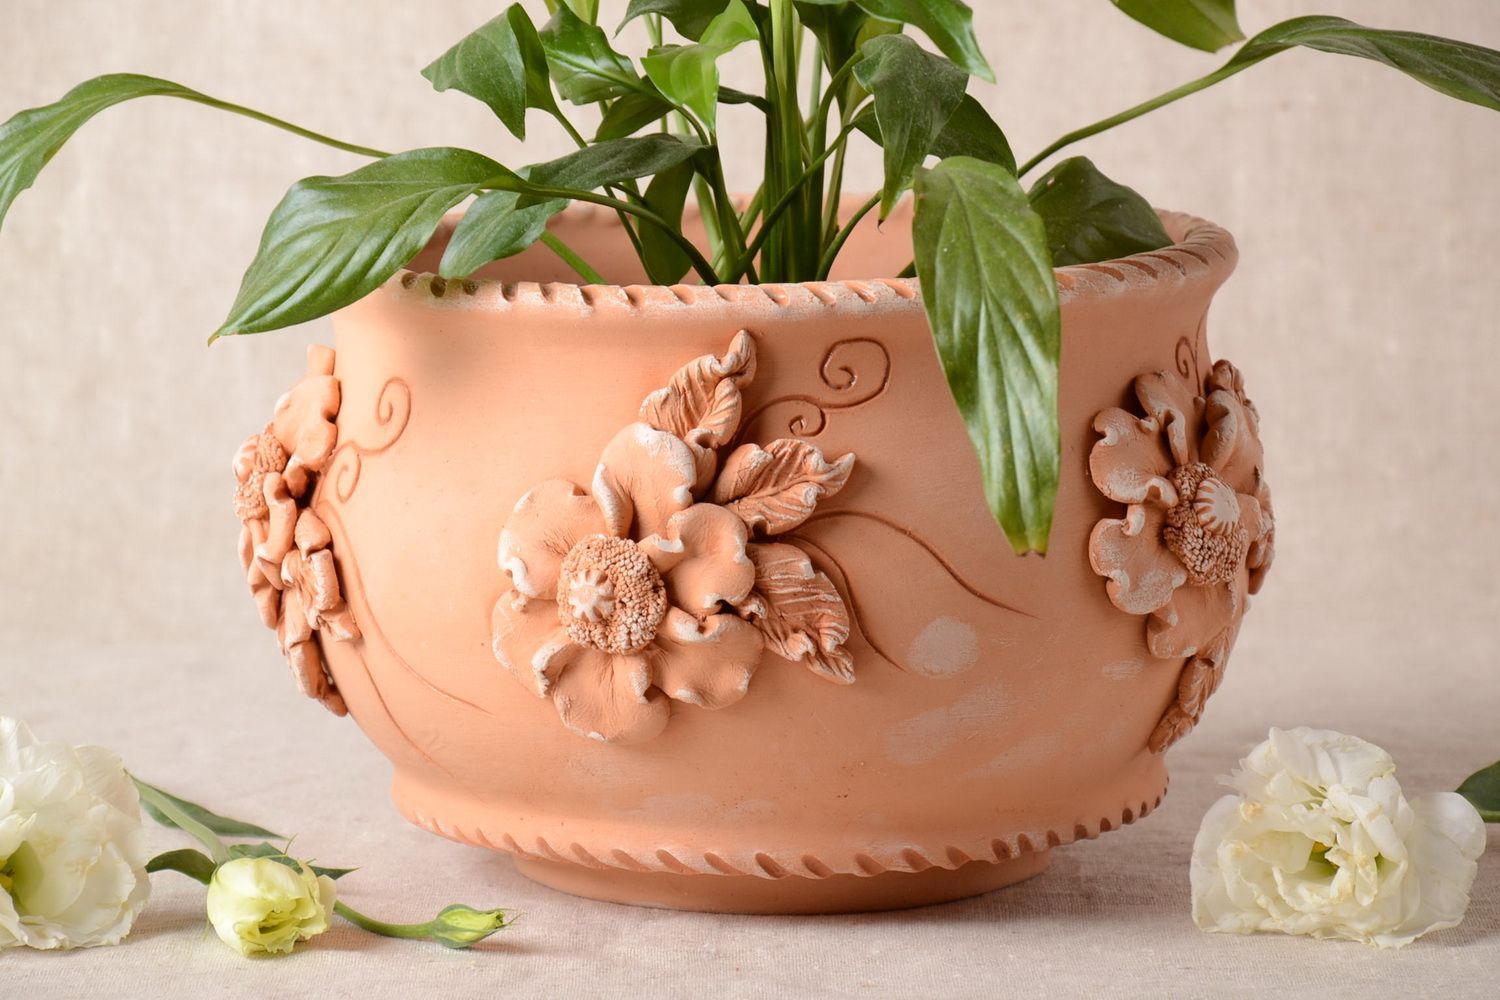 80 oz ceramic flower pot 7 inches tall 11 inches wide and with floral molded pattern 7,6 lb photo 1